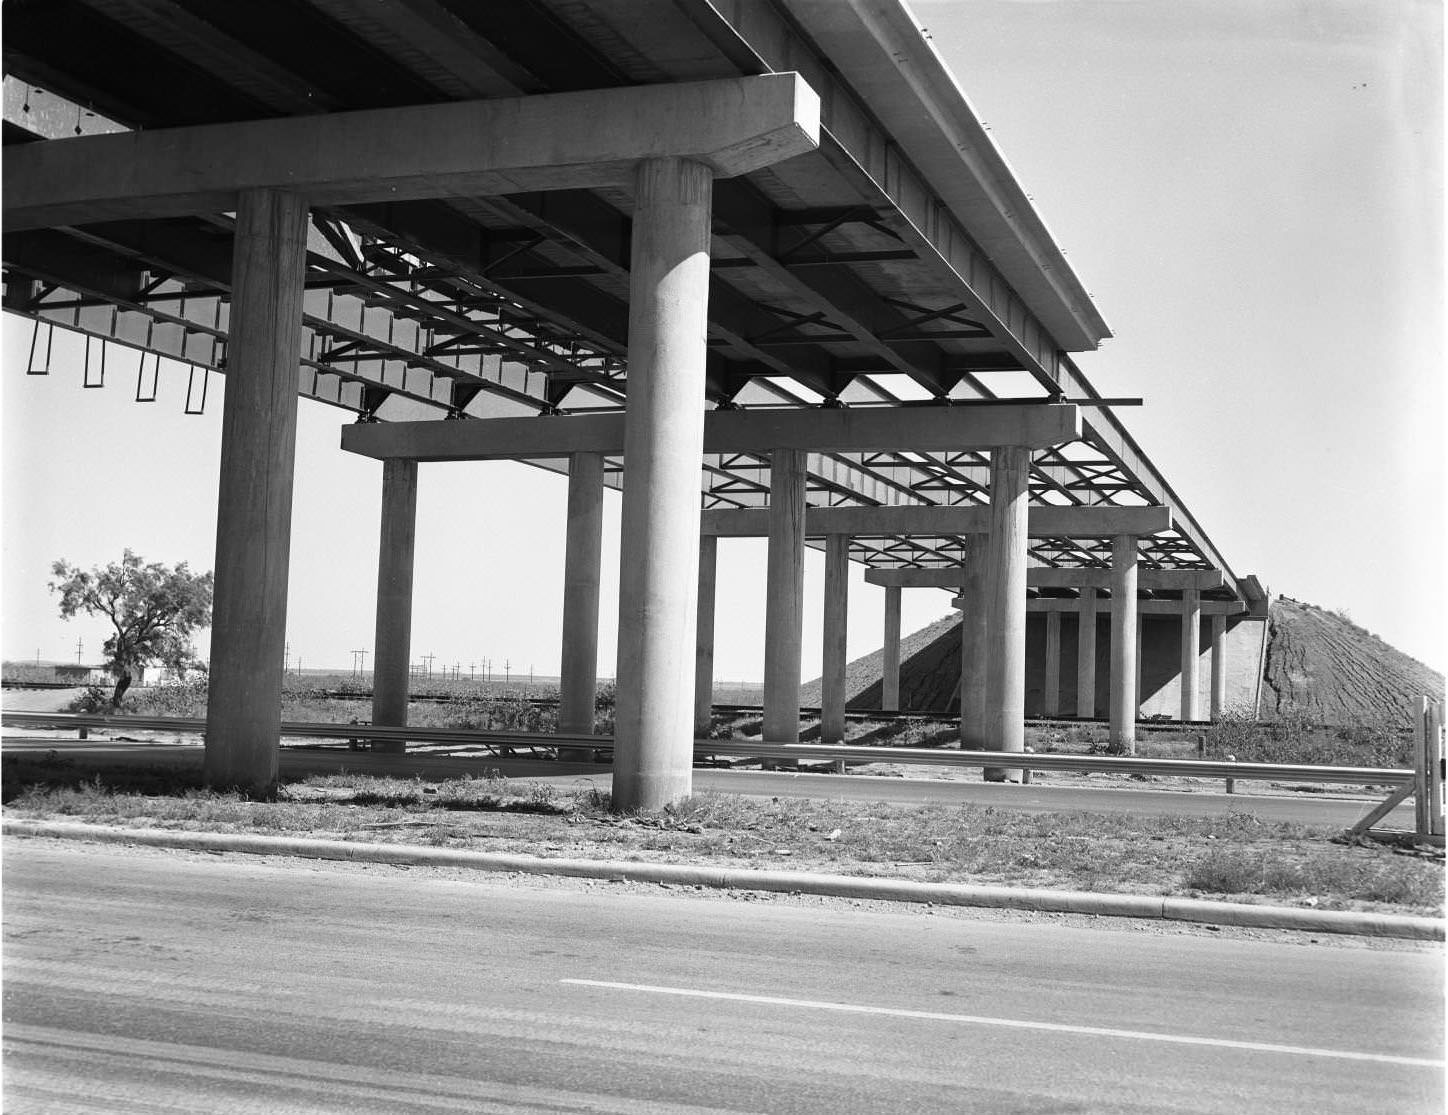 A partially constructed overpass at Highway 80 and S. 1st St. in Abilene, 1958